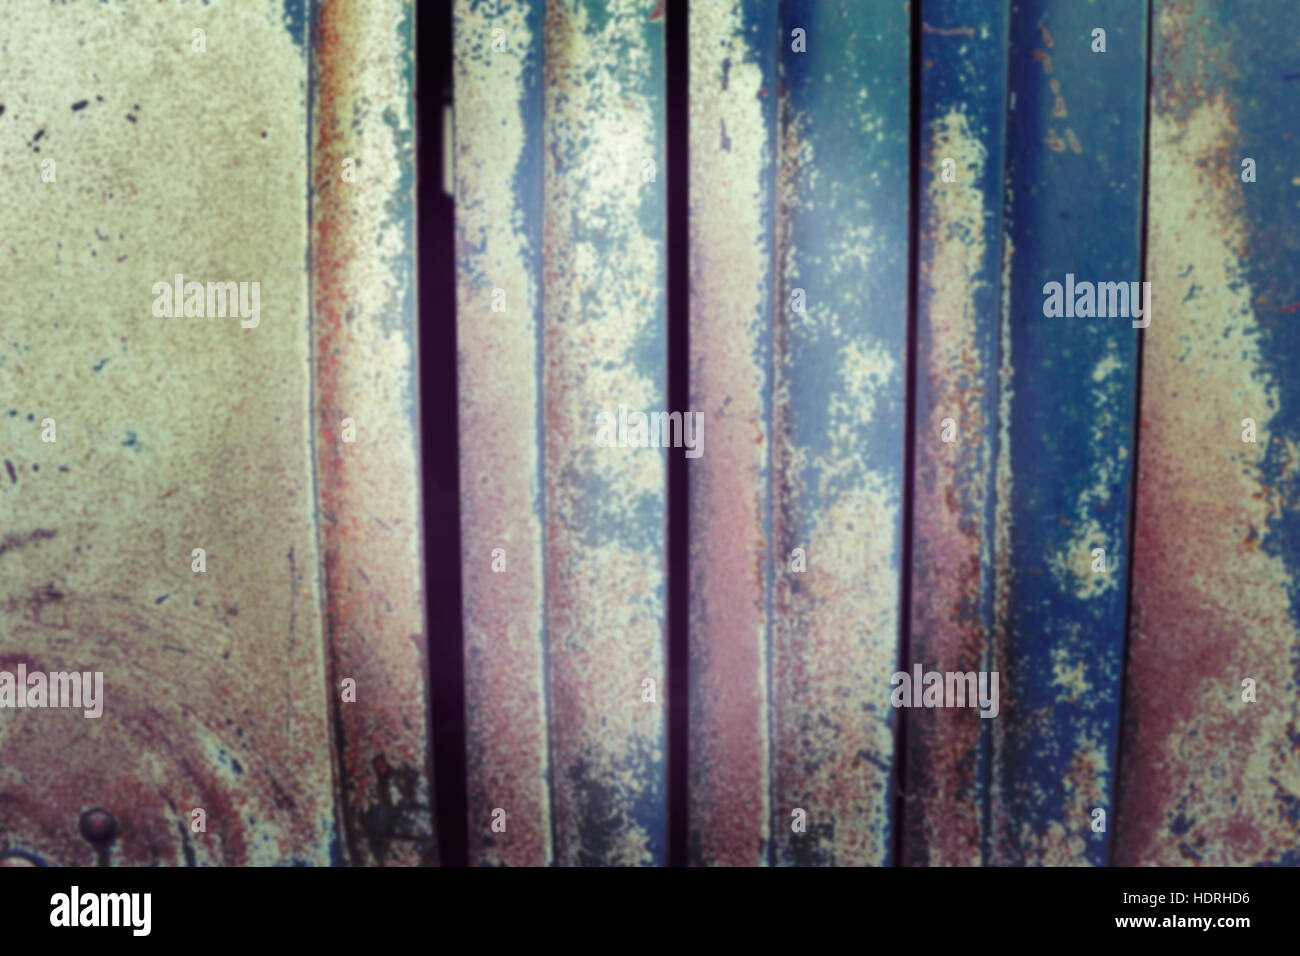 Vintage toned blurred abstract rusty metal background. Stock Photo